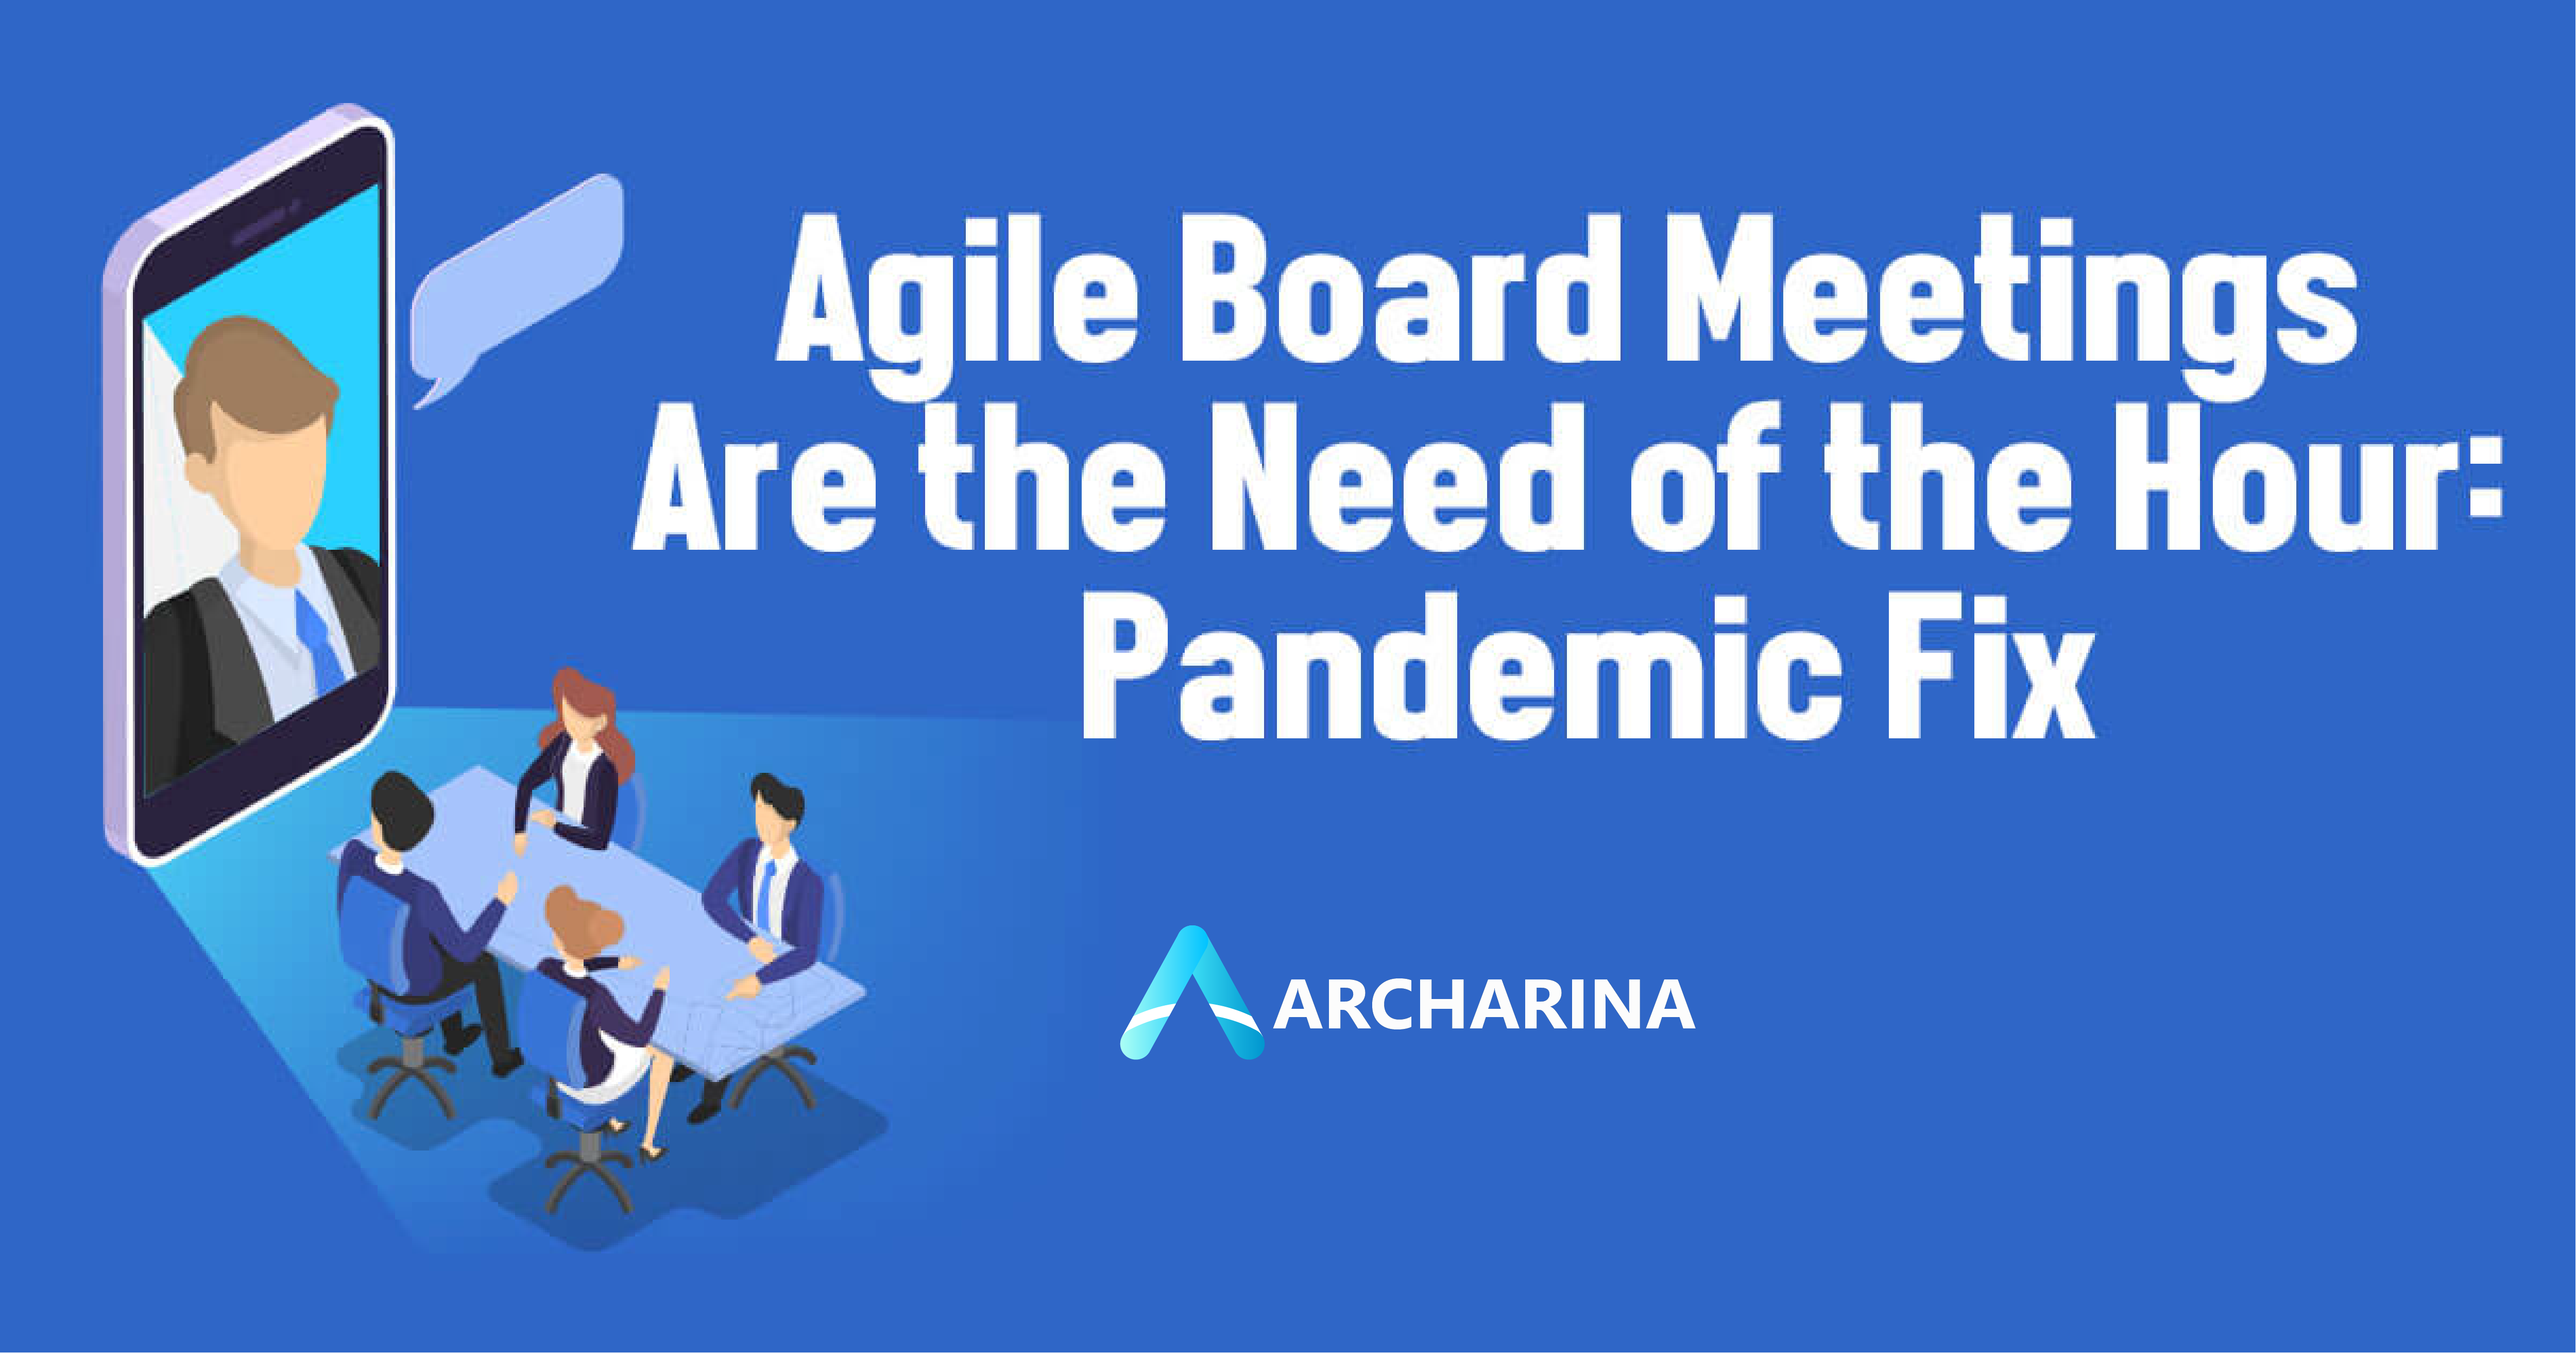 Agile-Board-Meetings-Are-the-Need-of-the-Hour-Pandemic-Fix-FB.jpg